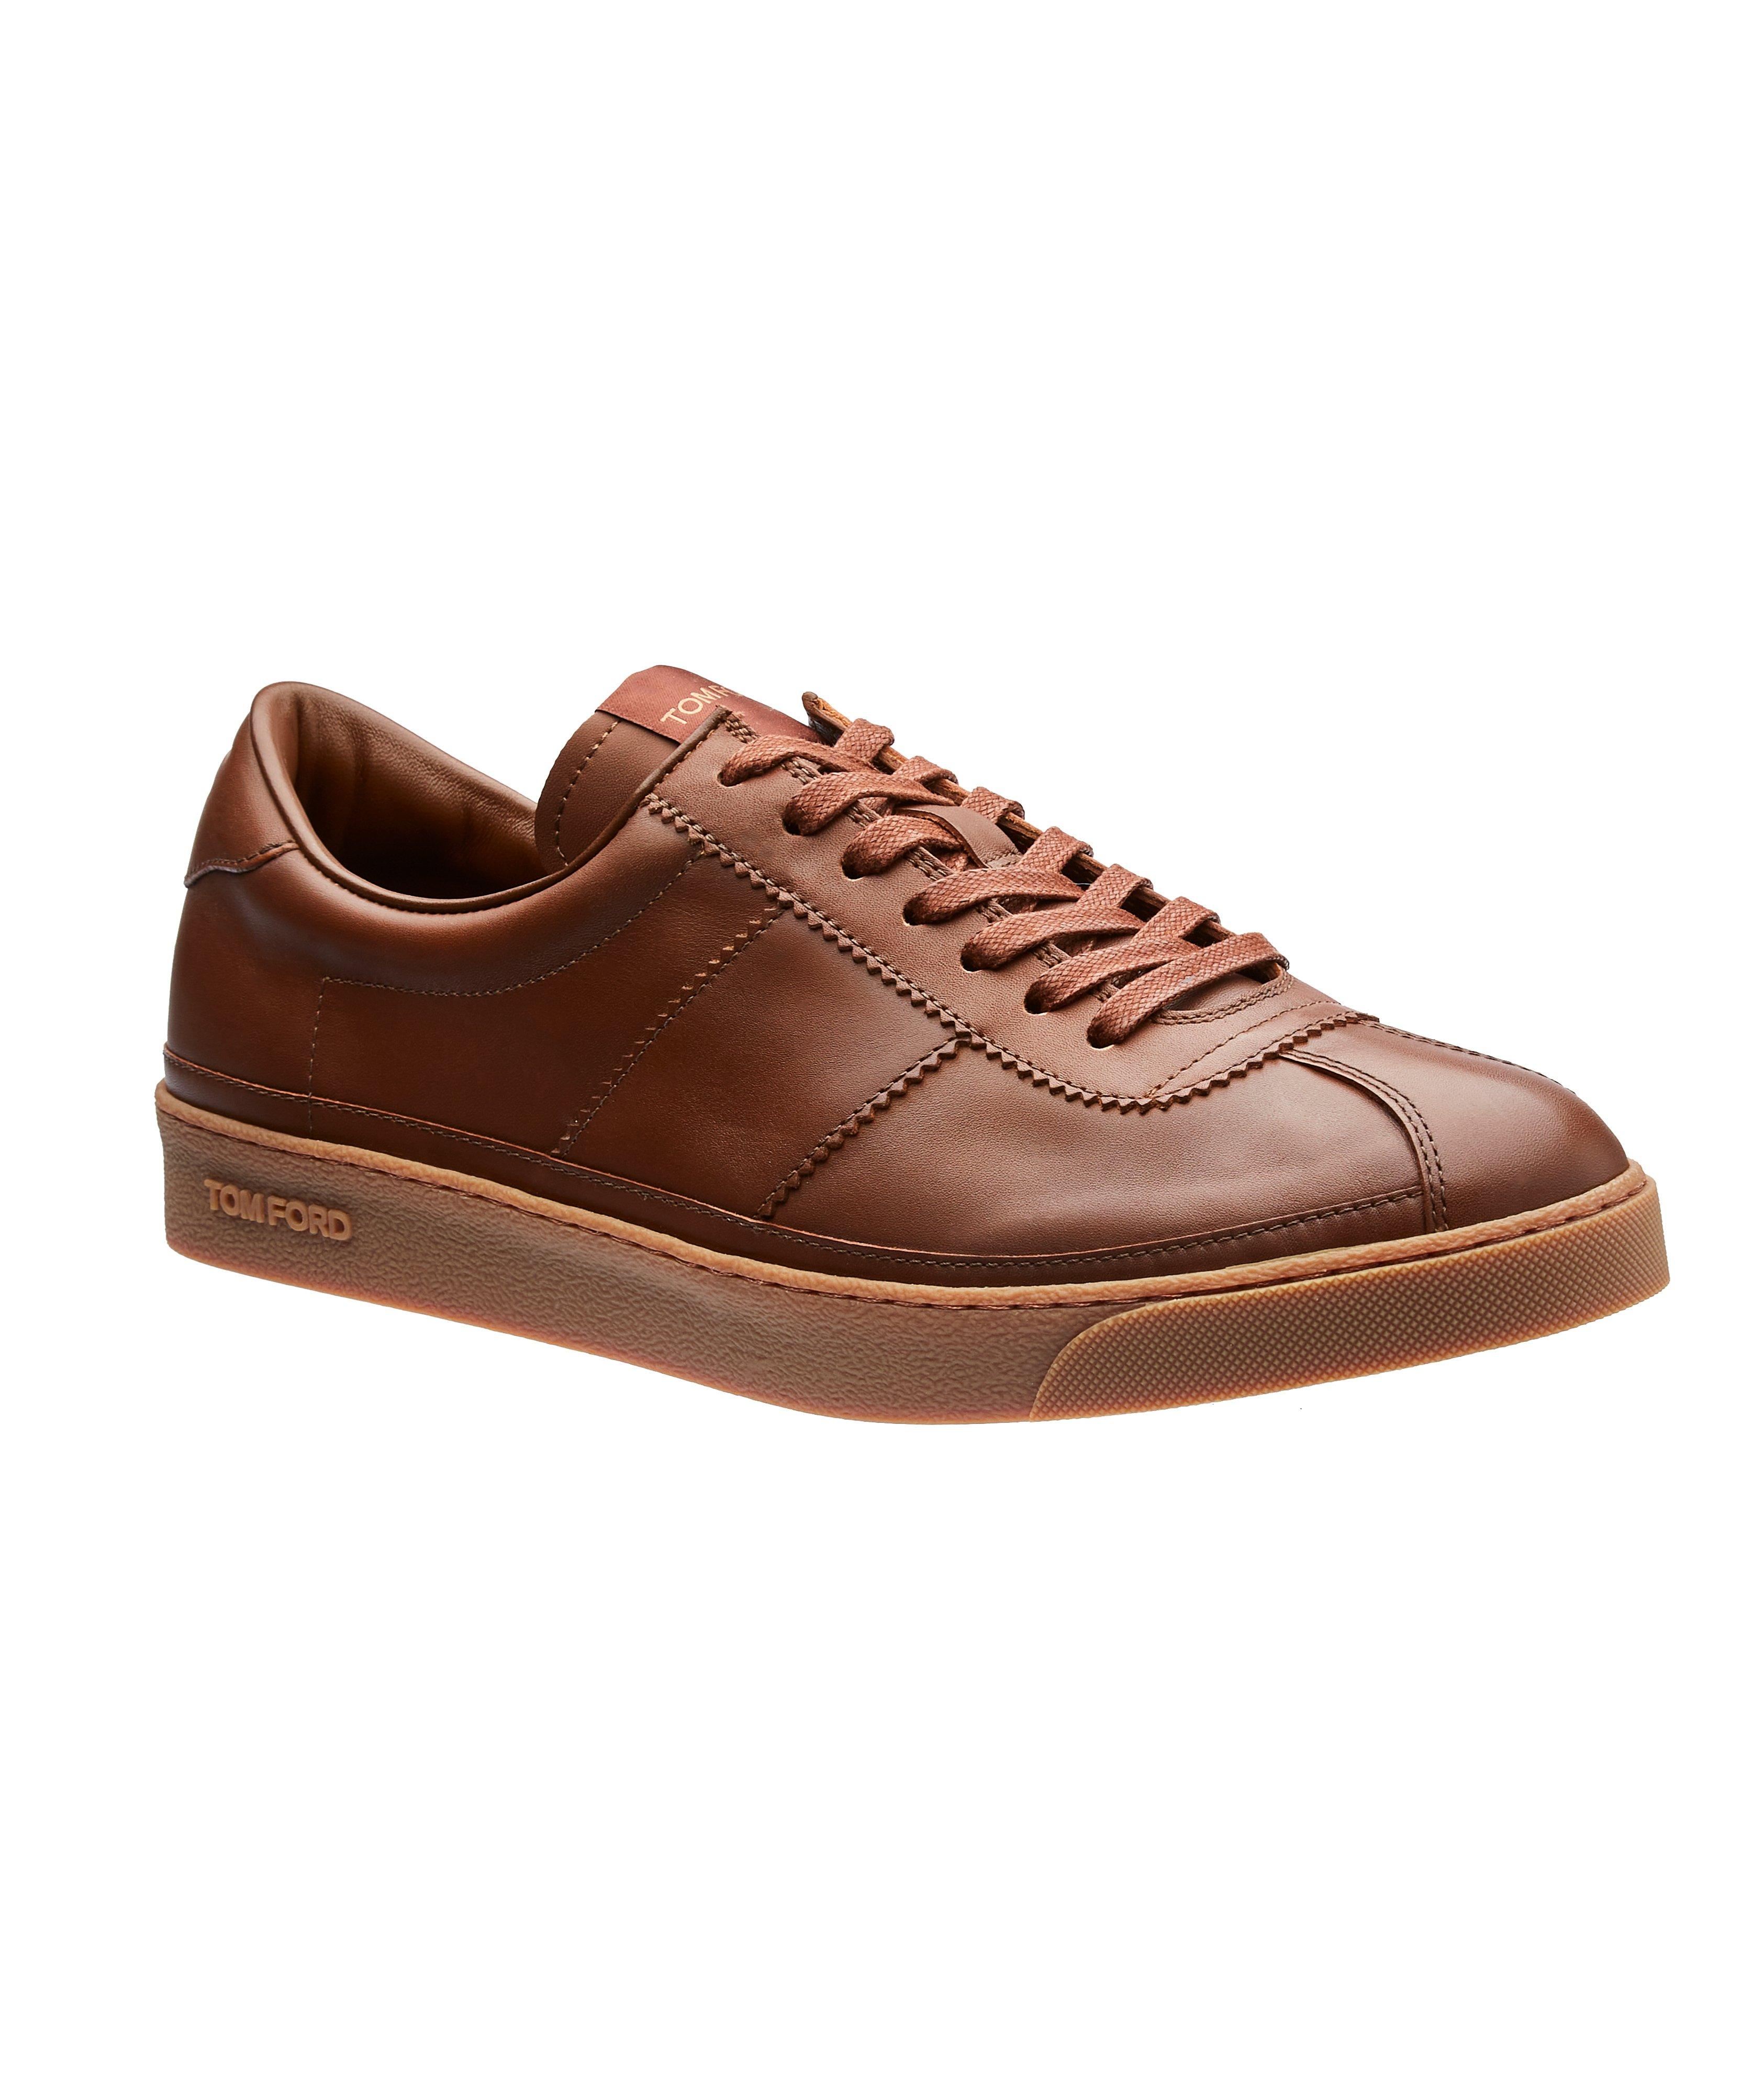 Bannister Calfskin Sneakers image 0